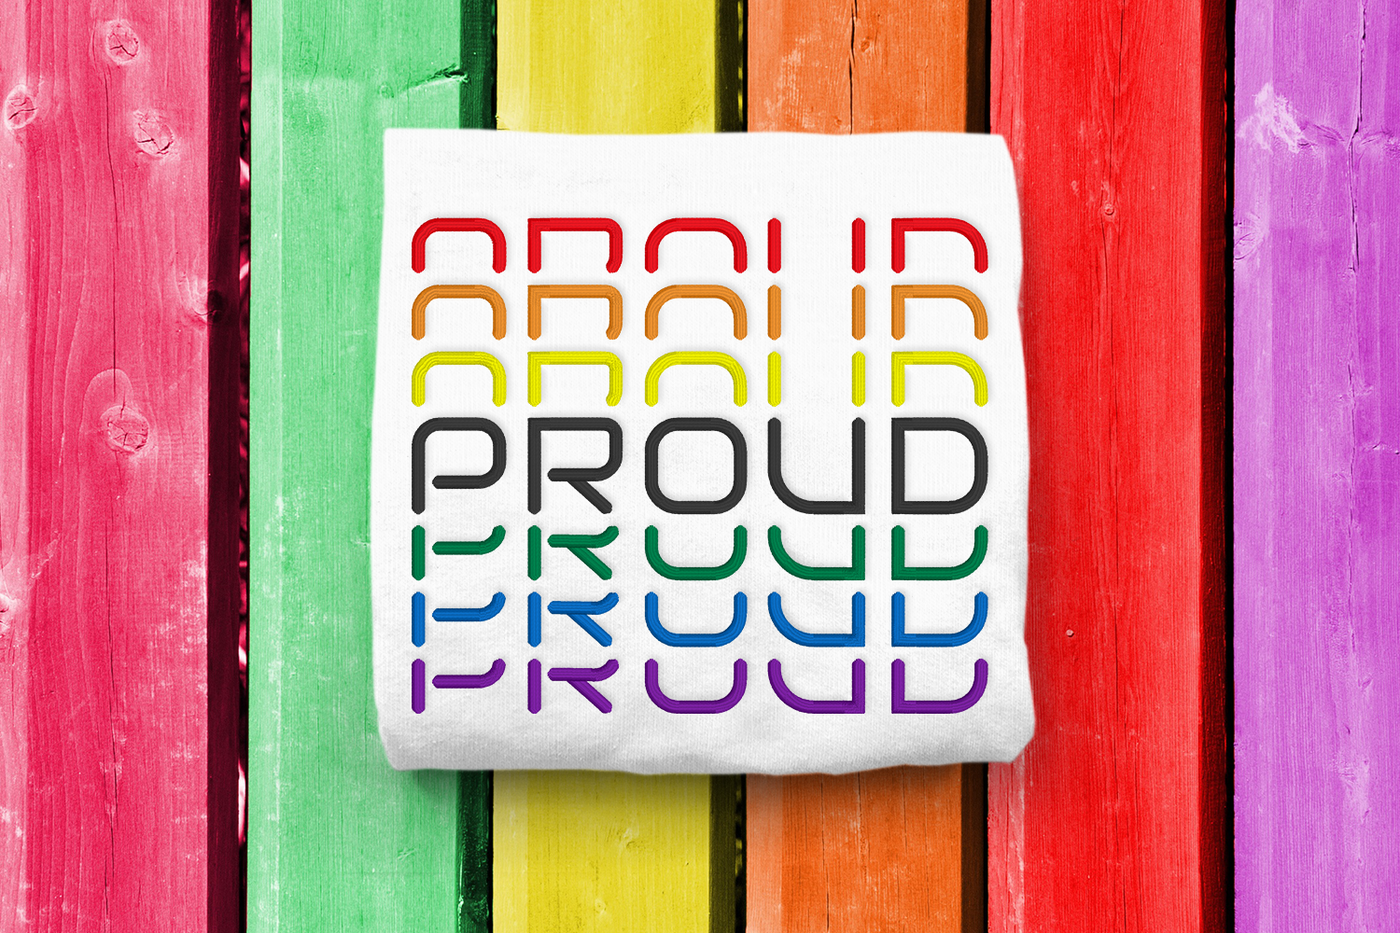 Stacked Proud embroidery design shown stitched on a white shirt on a rainbow painted wood background.